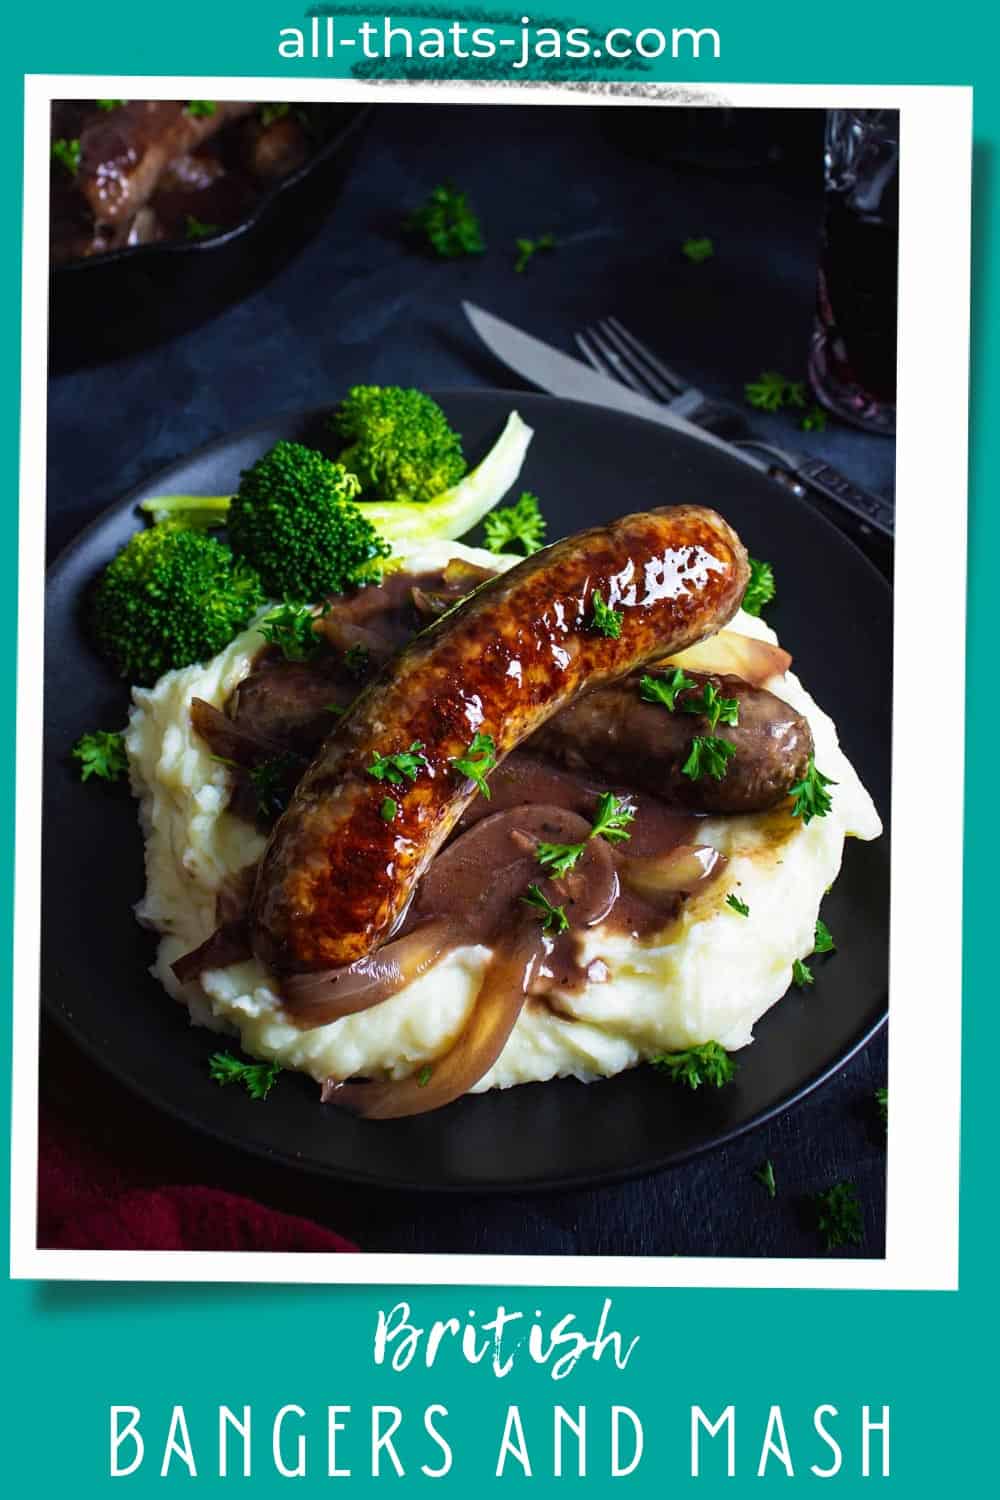 A plate of British bangers and mash dish with text overlay.